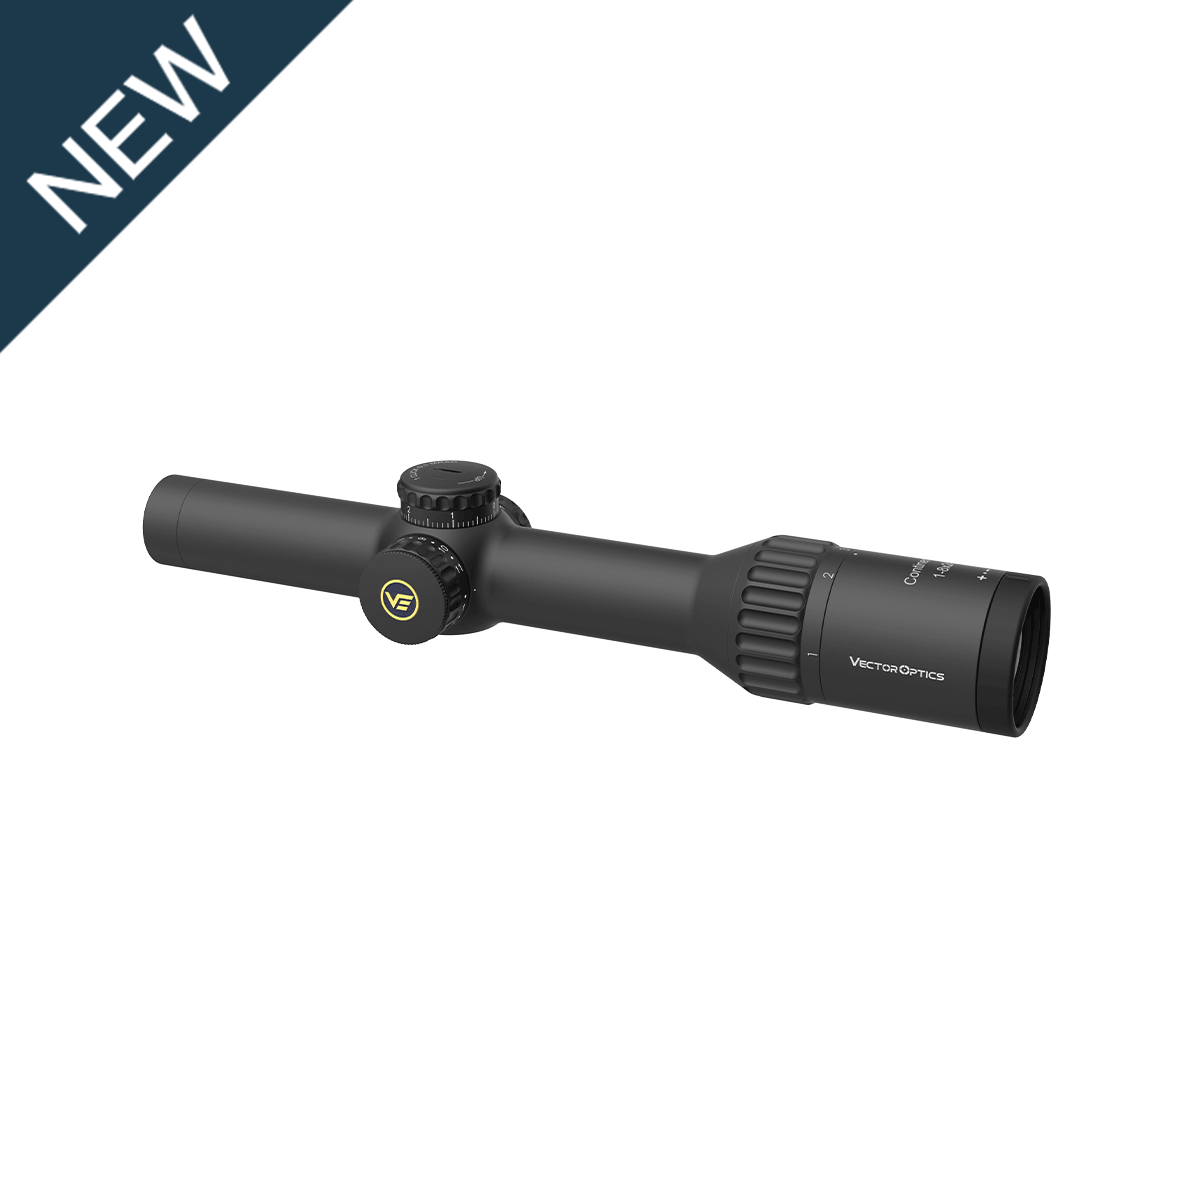 Continental x8 1-8x24 - Tactical LPVO Scope-Rifle Scope & Red Dot 